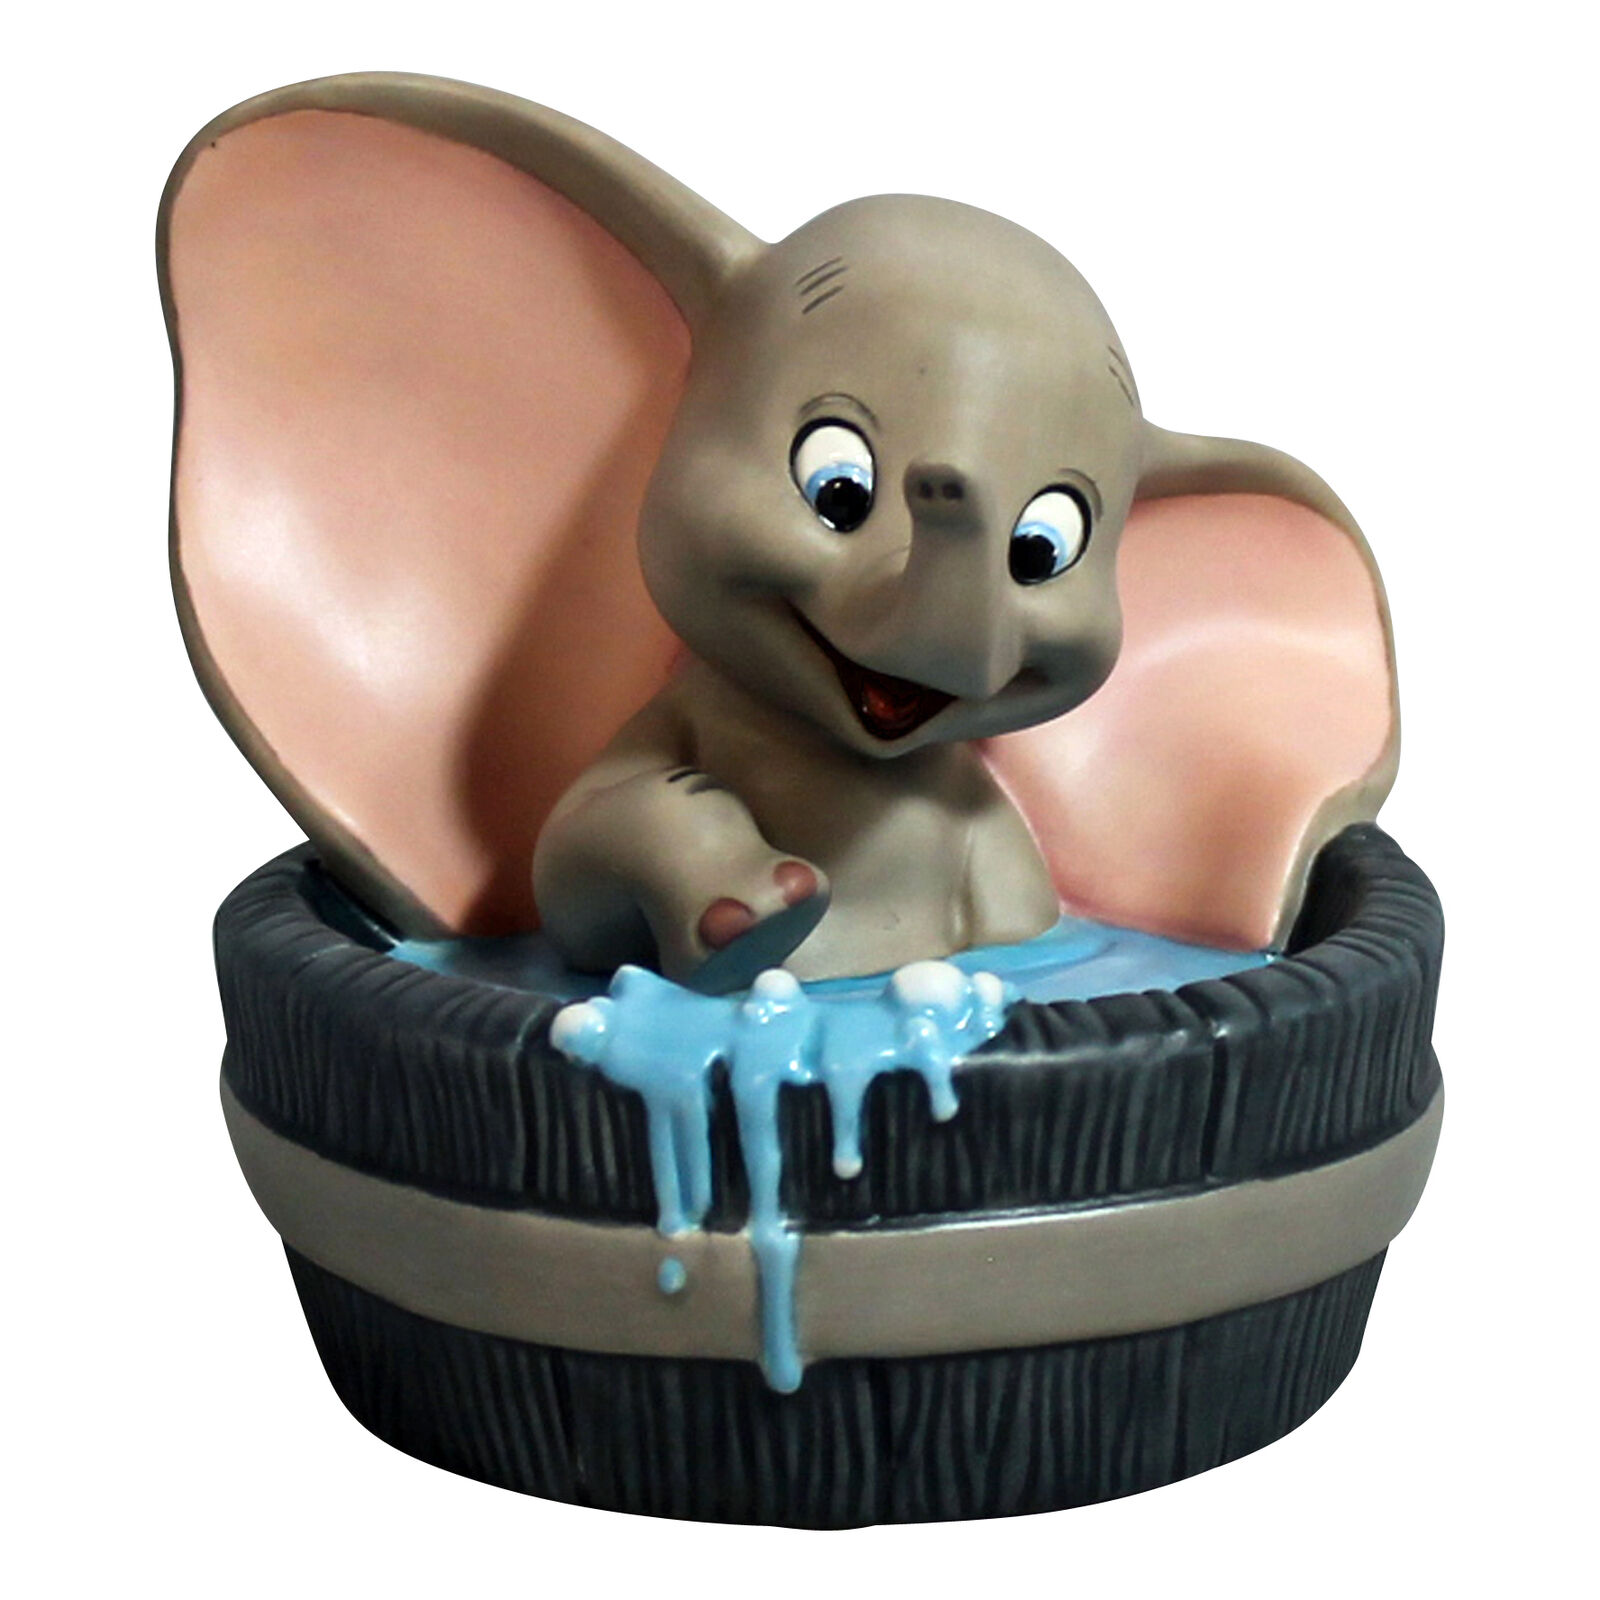 WDCC Dumbo - Simply Adorable | 41082 | Disney | Please Read